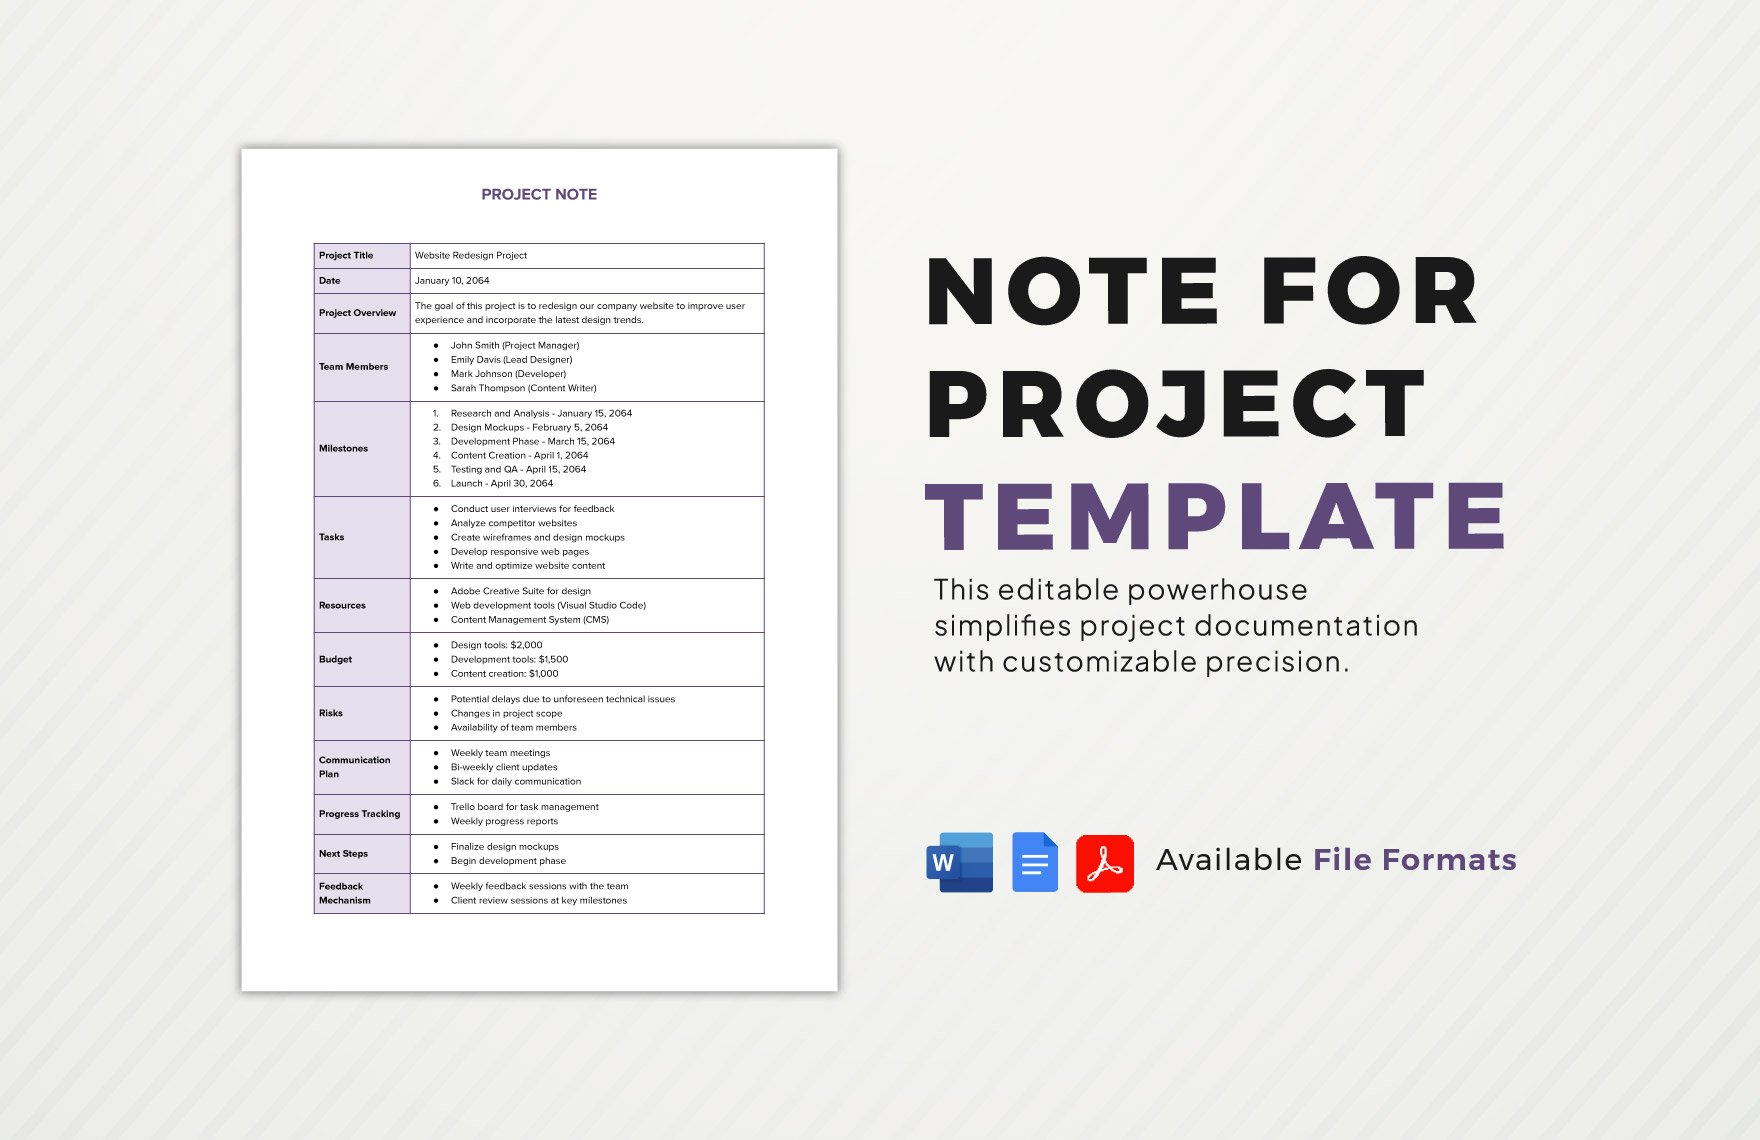 Note for Project Template